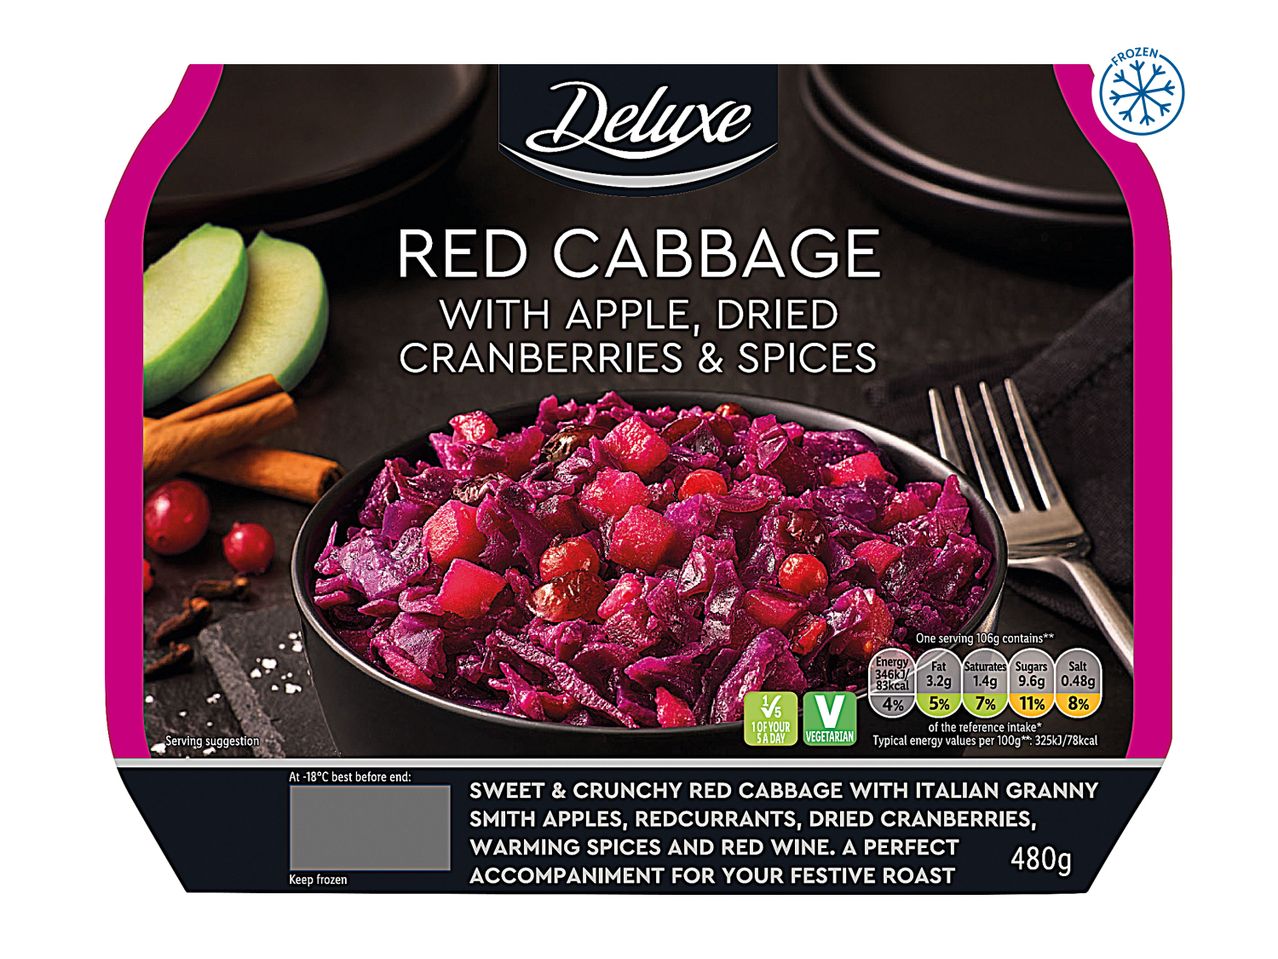 Go to full screen view: Deluxe Red Cabbage & Apple - Image 1